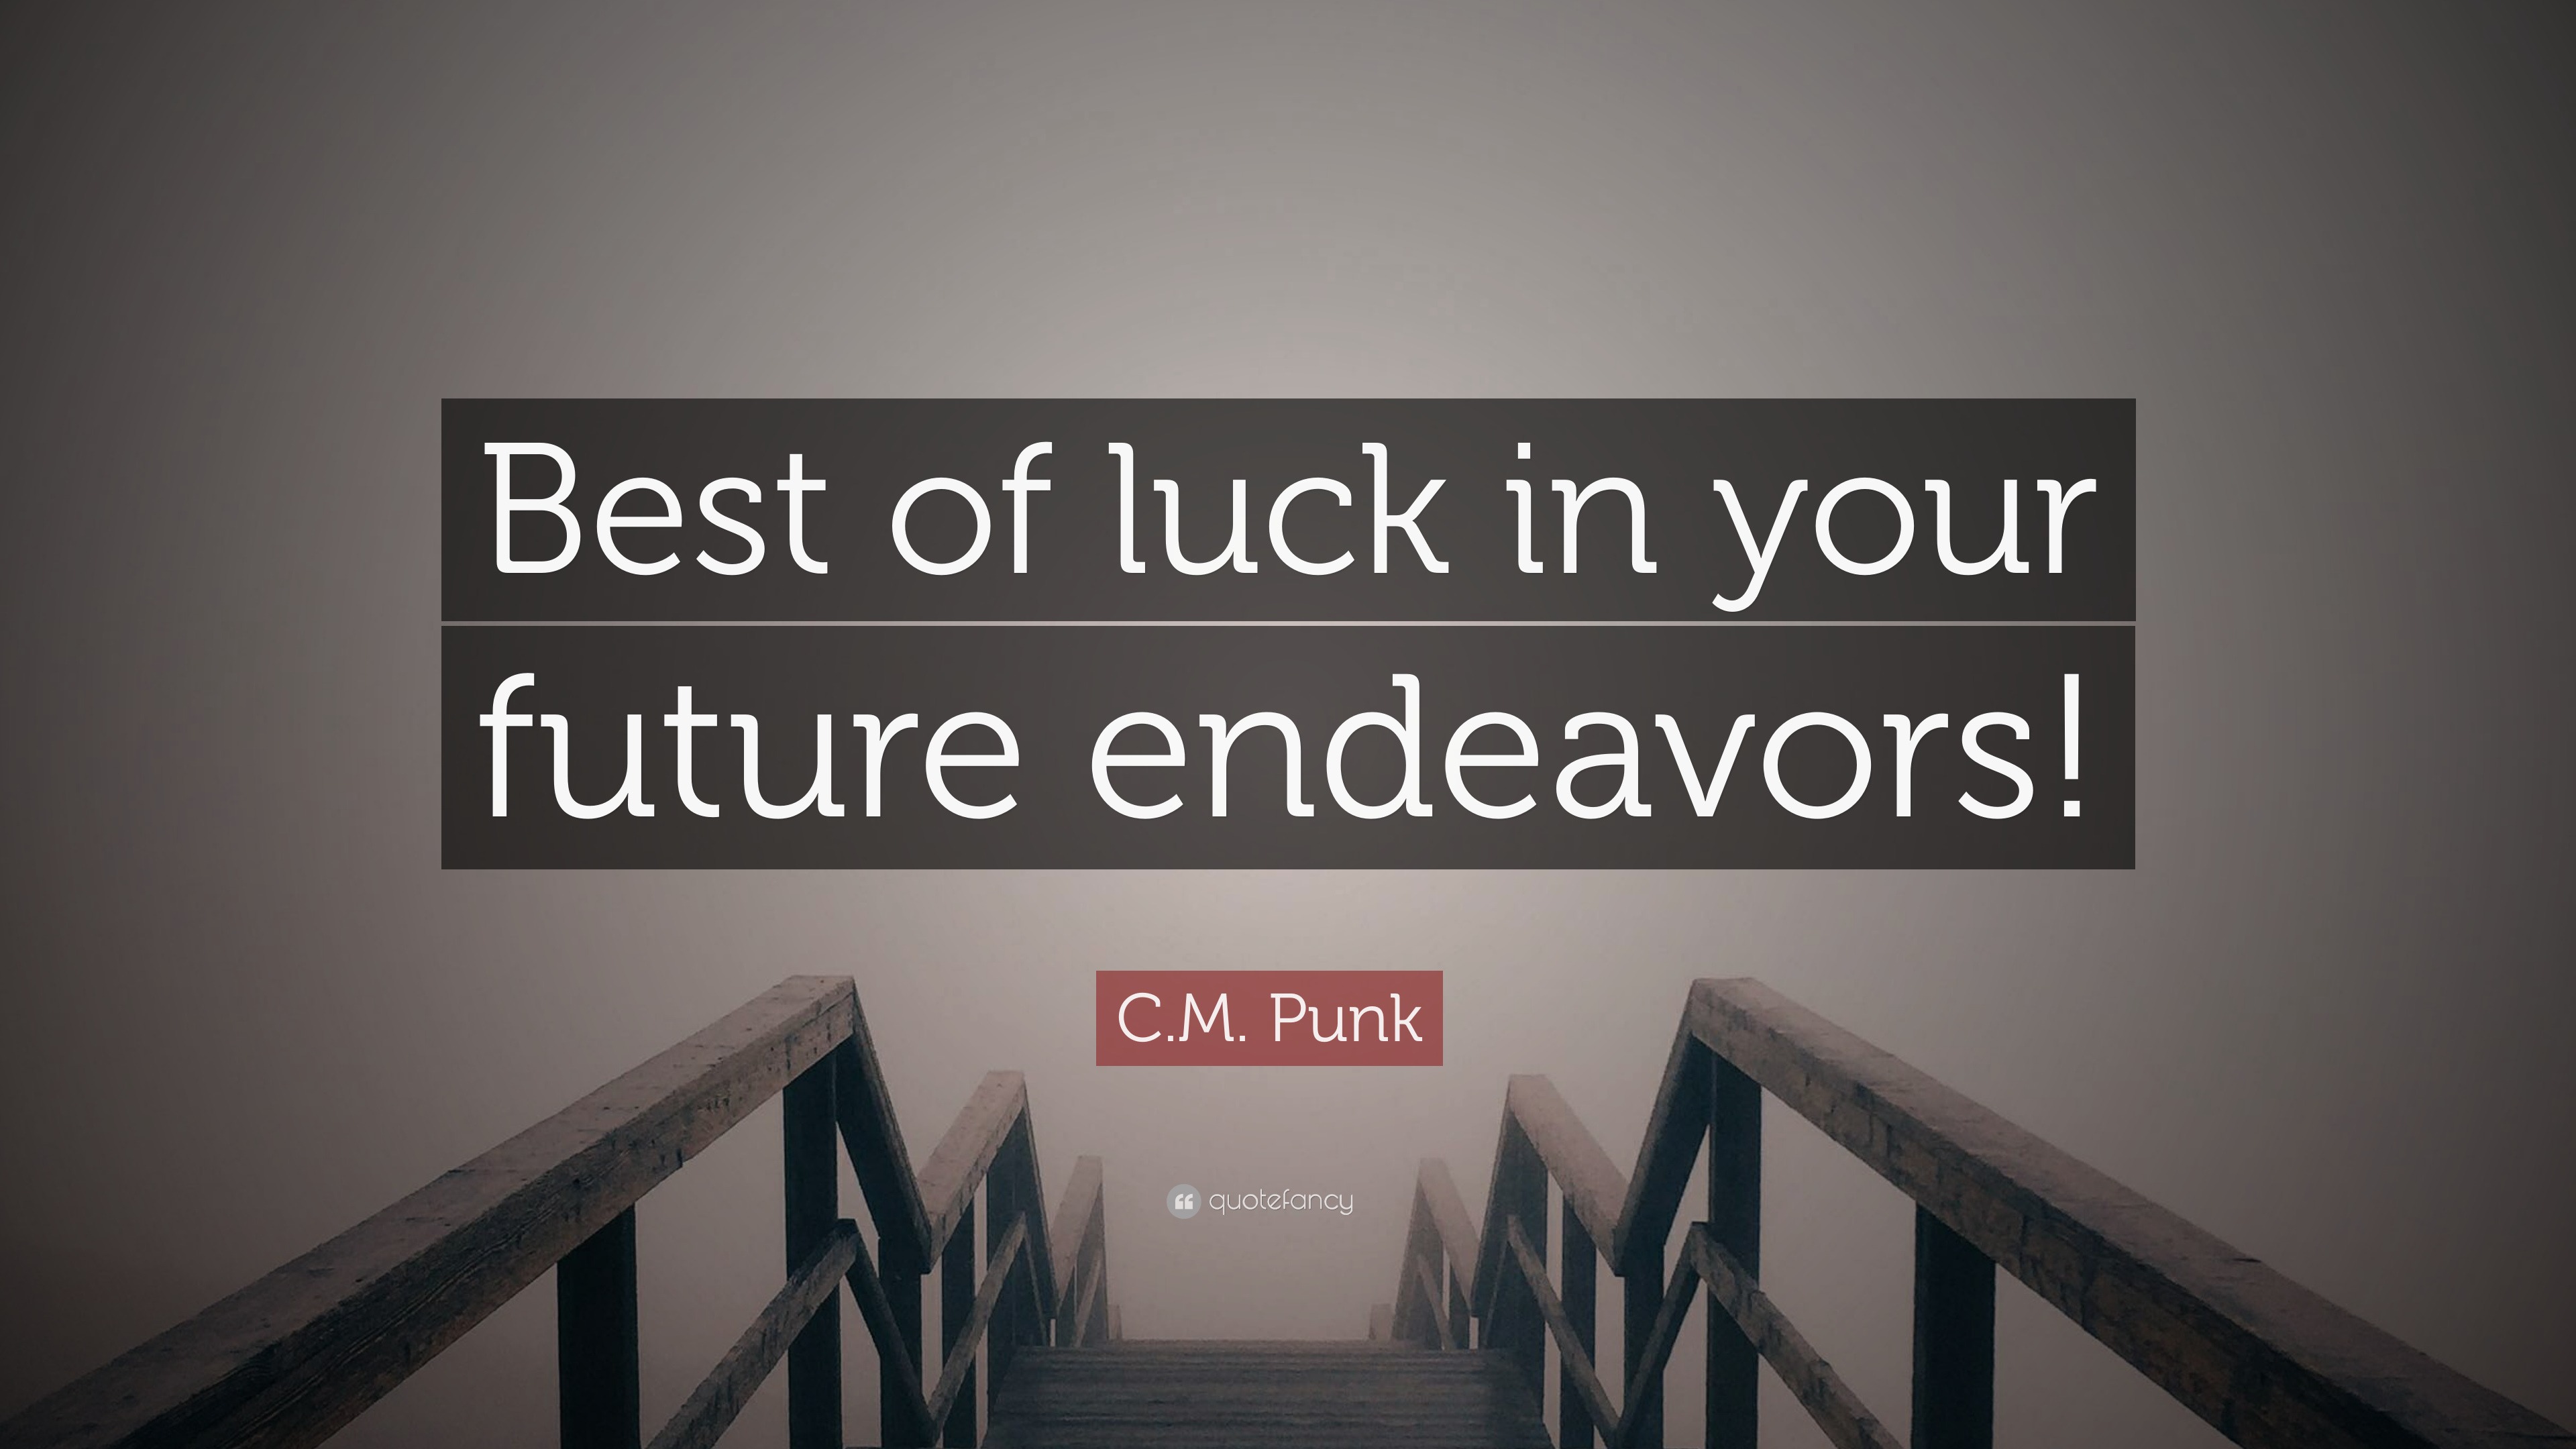 C.M. Punk Quote “Best of luck in your future endeavors!”